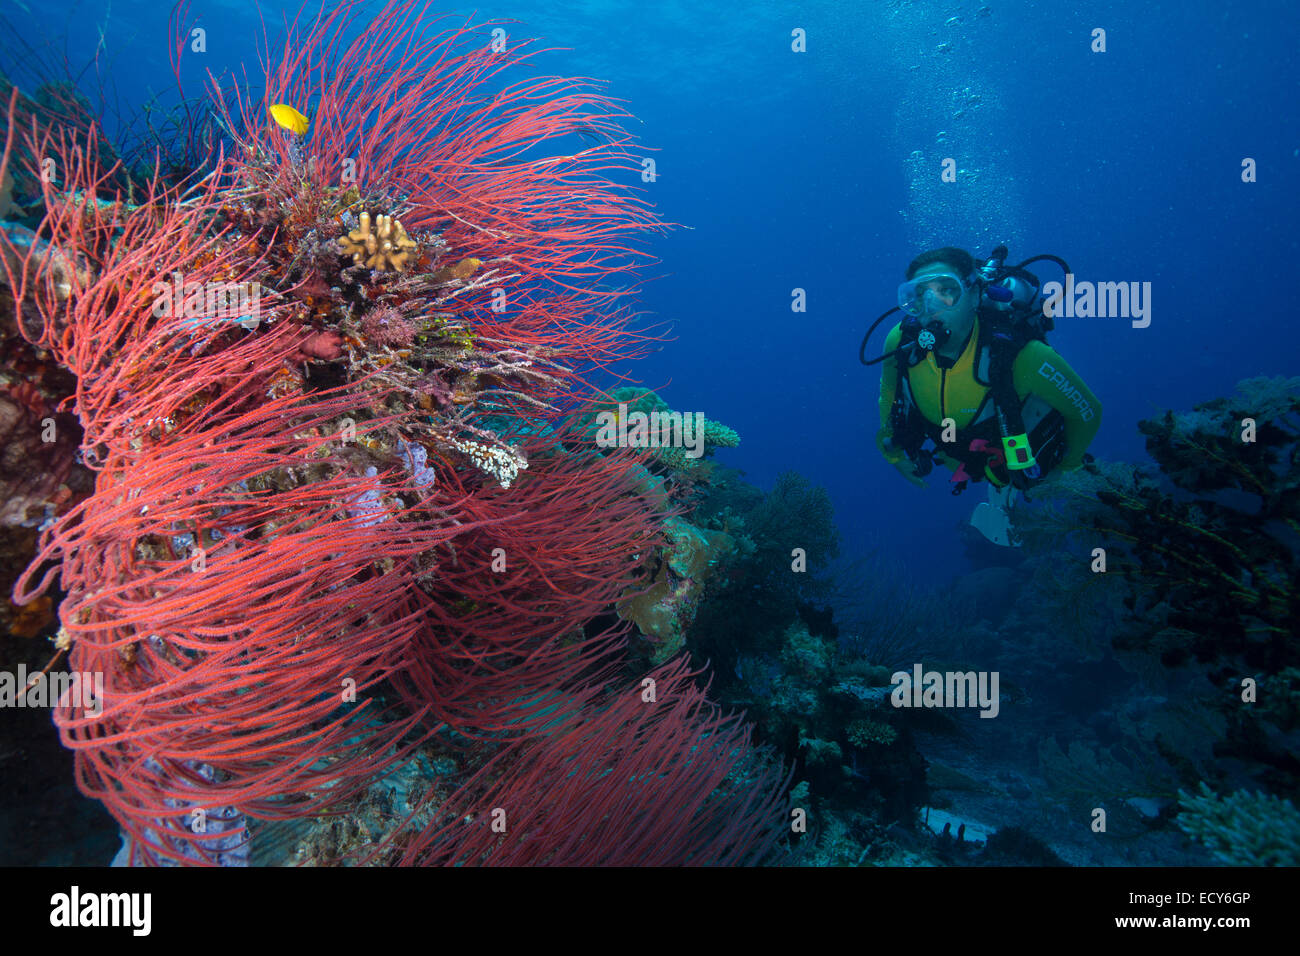 Diver looking at a Red Sea Whip (Ellisella ceratophyta), Palau Stock Photo